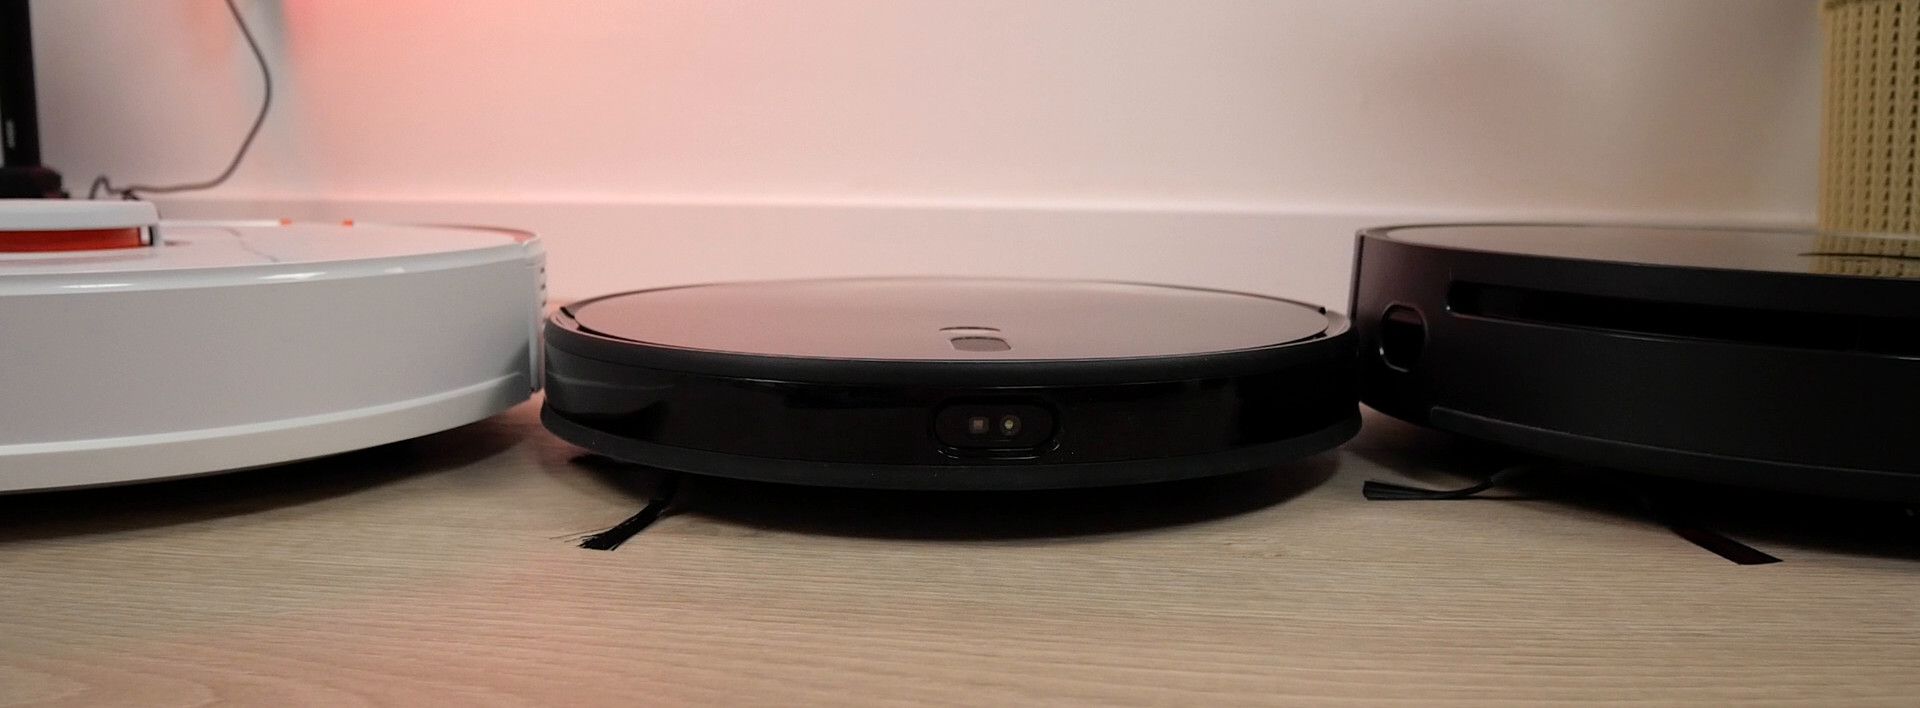 Xiaomi Mijia Ultra Slim compared to other robot vacuums